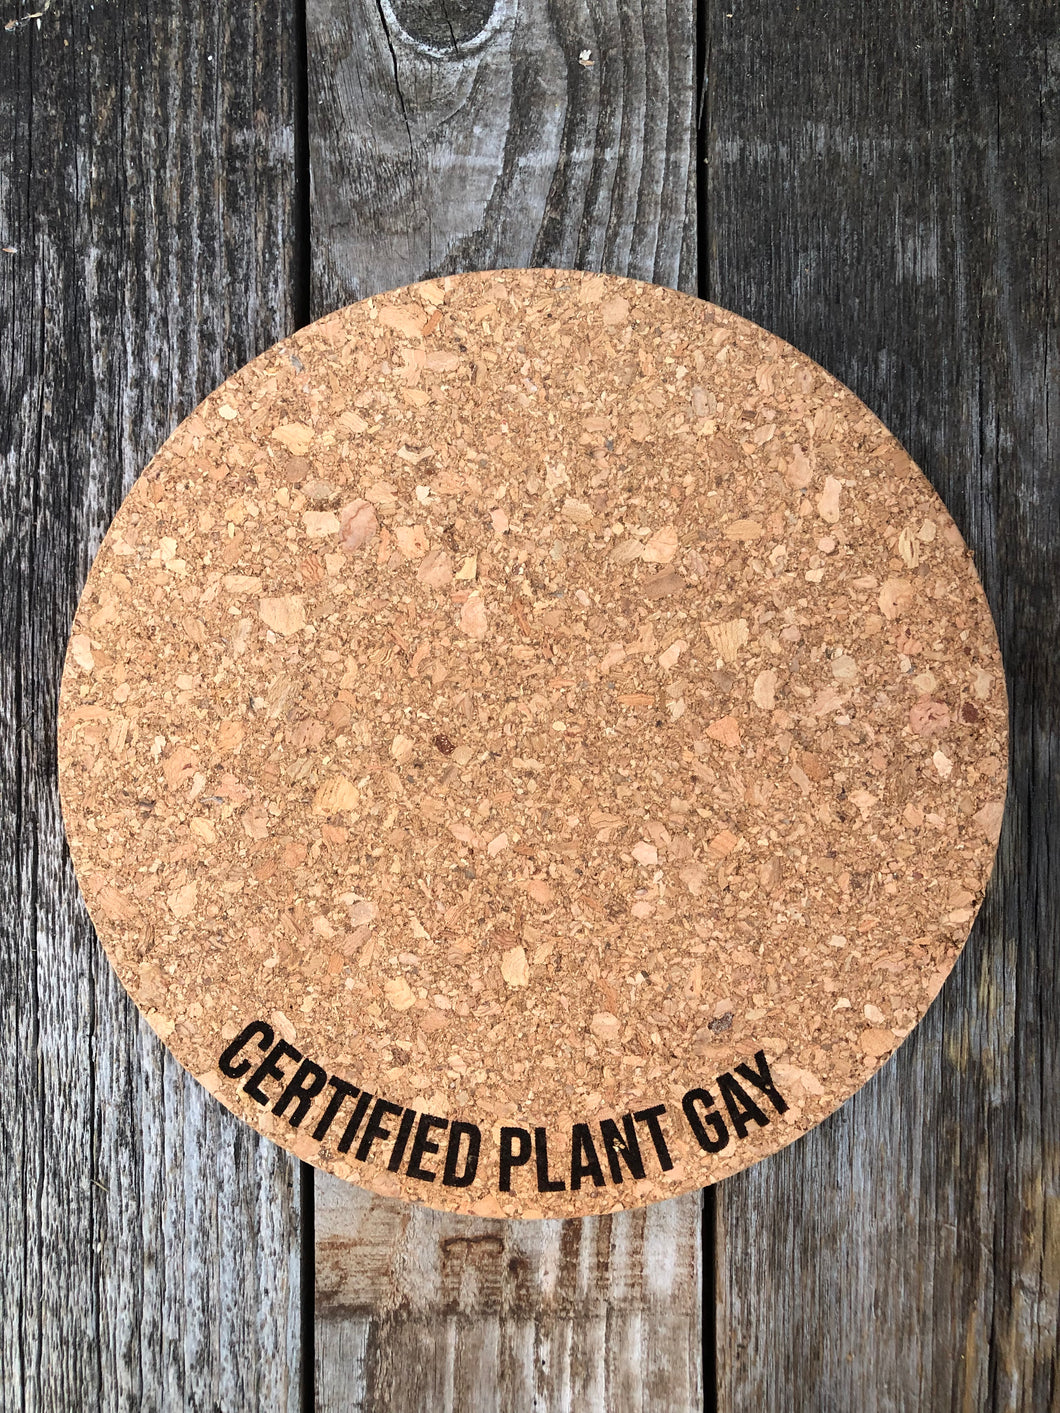 Certified Plant Gay Cork Plant Mat - Engraved Cork Round - Cork Bottom - No Plastic or Rubber - All Natural Material